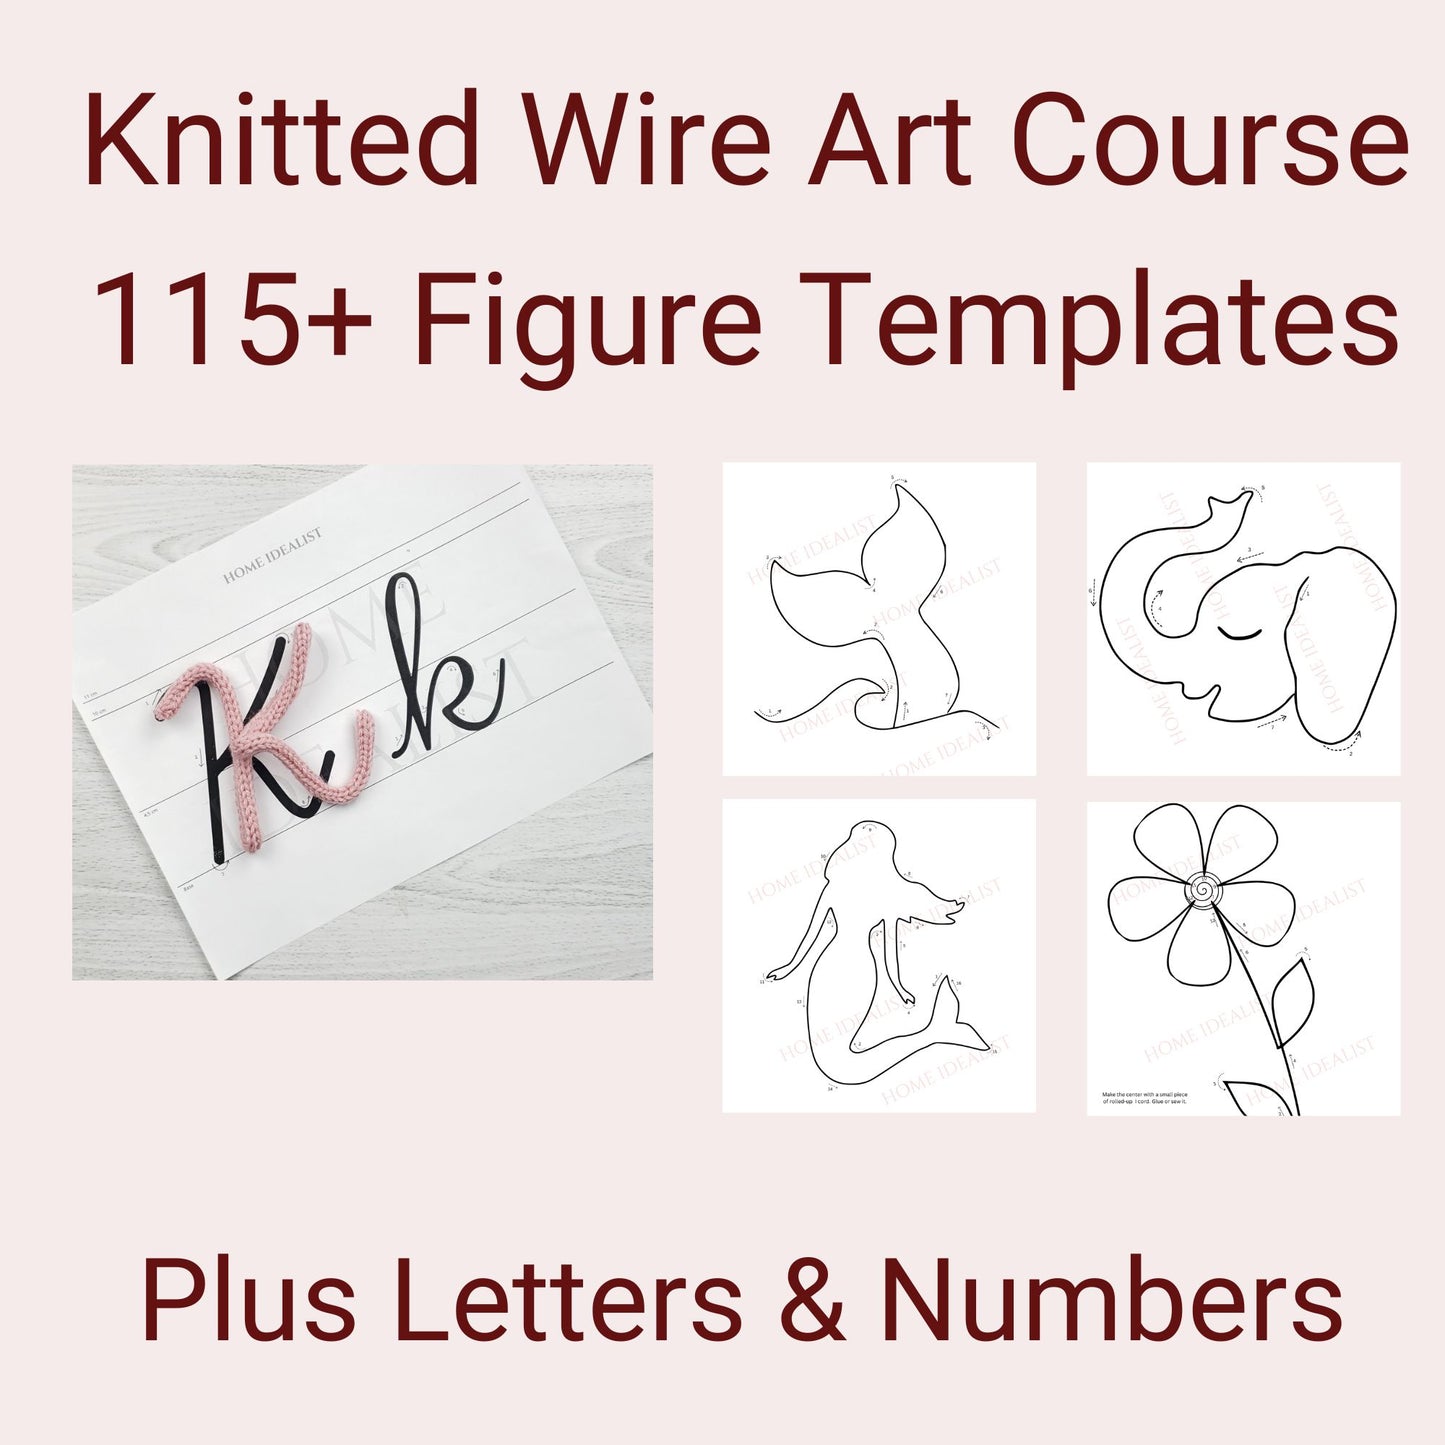 Knitted Wire Art Course for Beginners